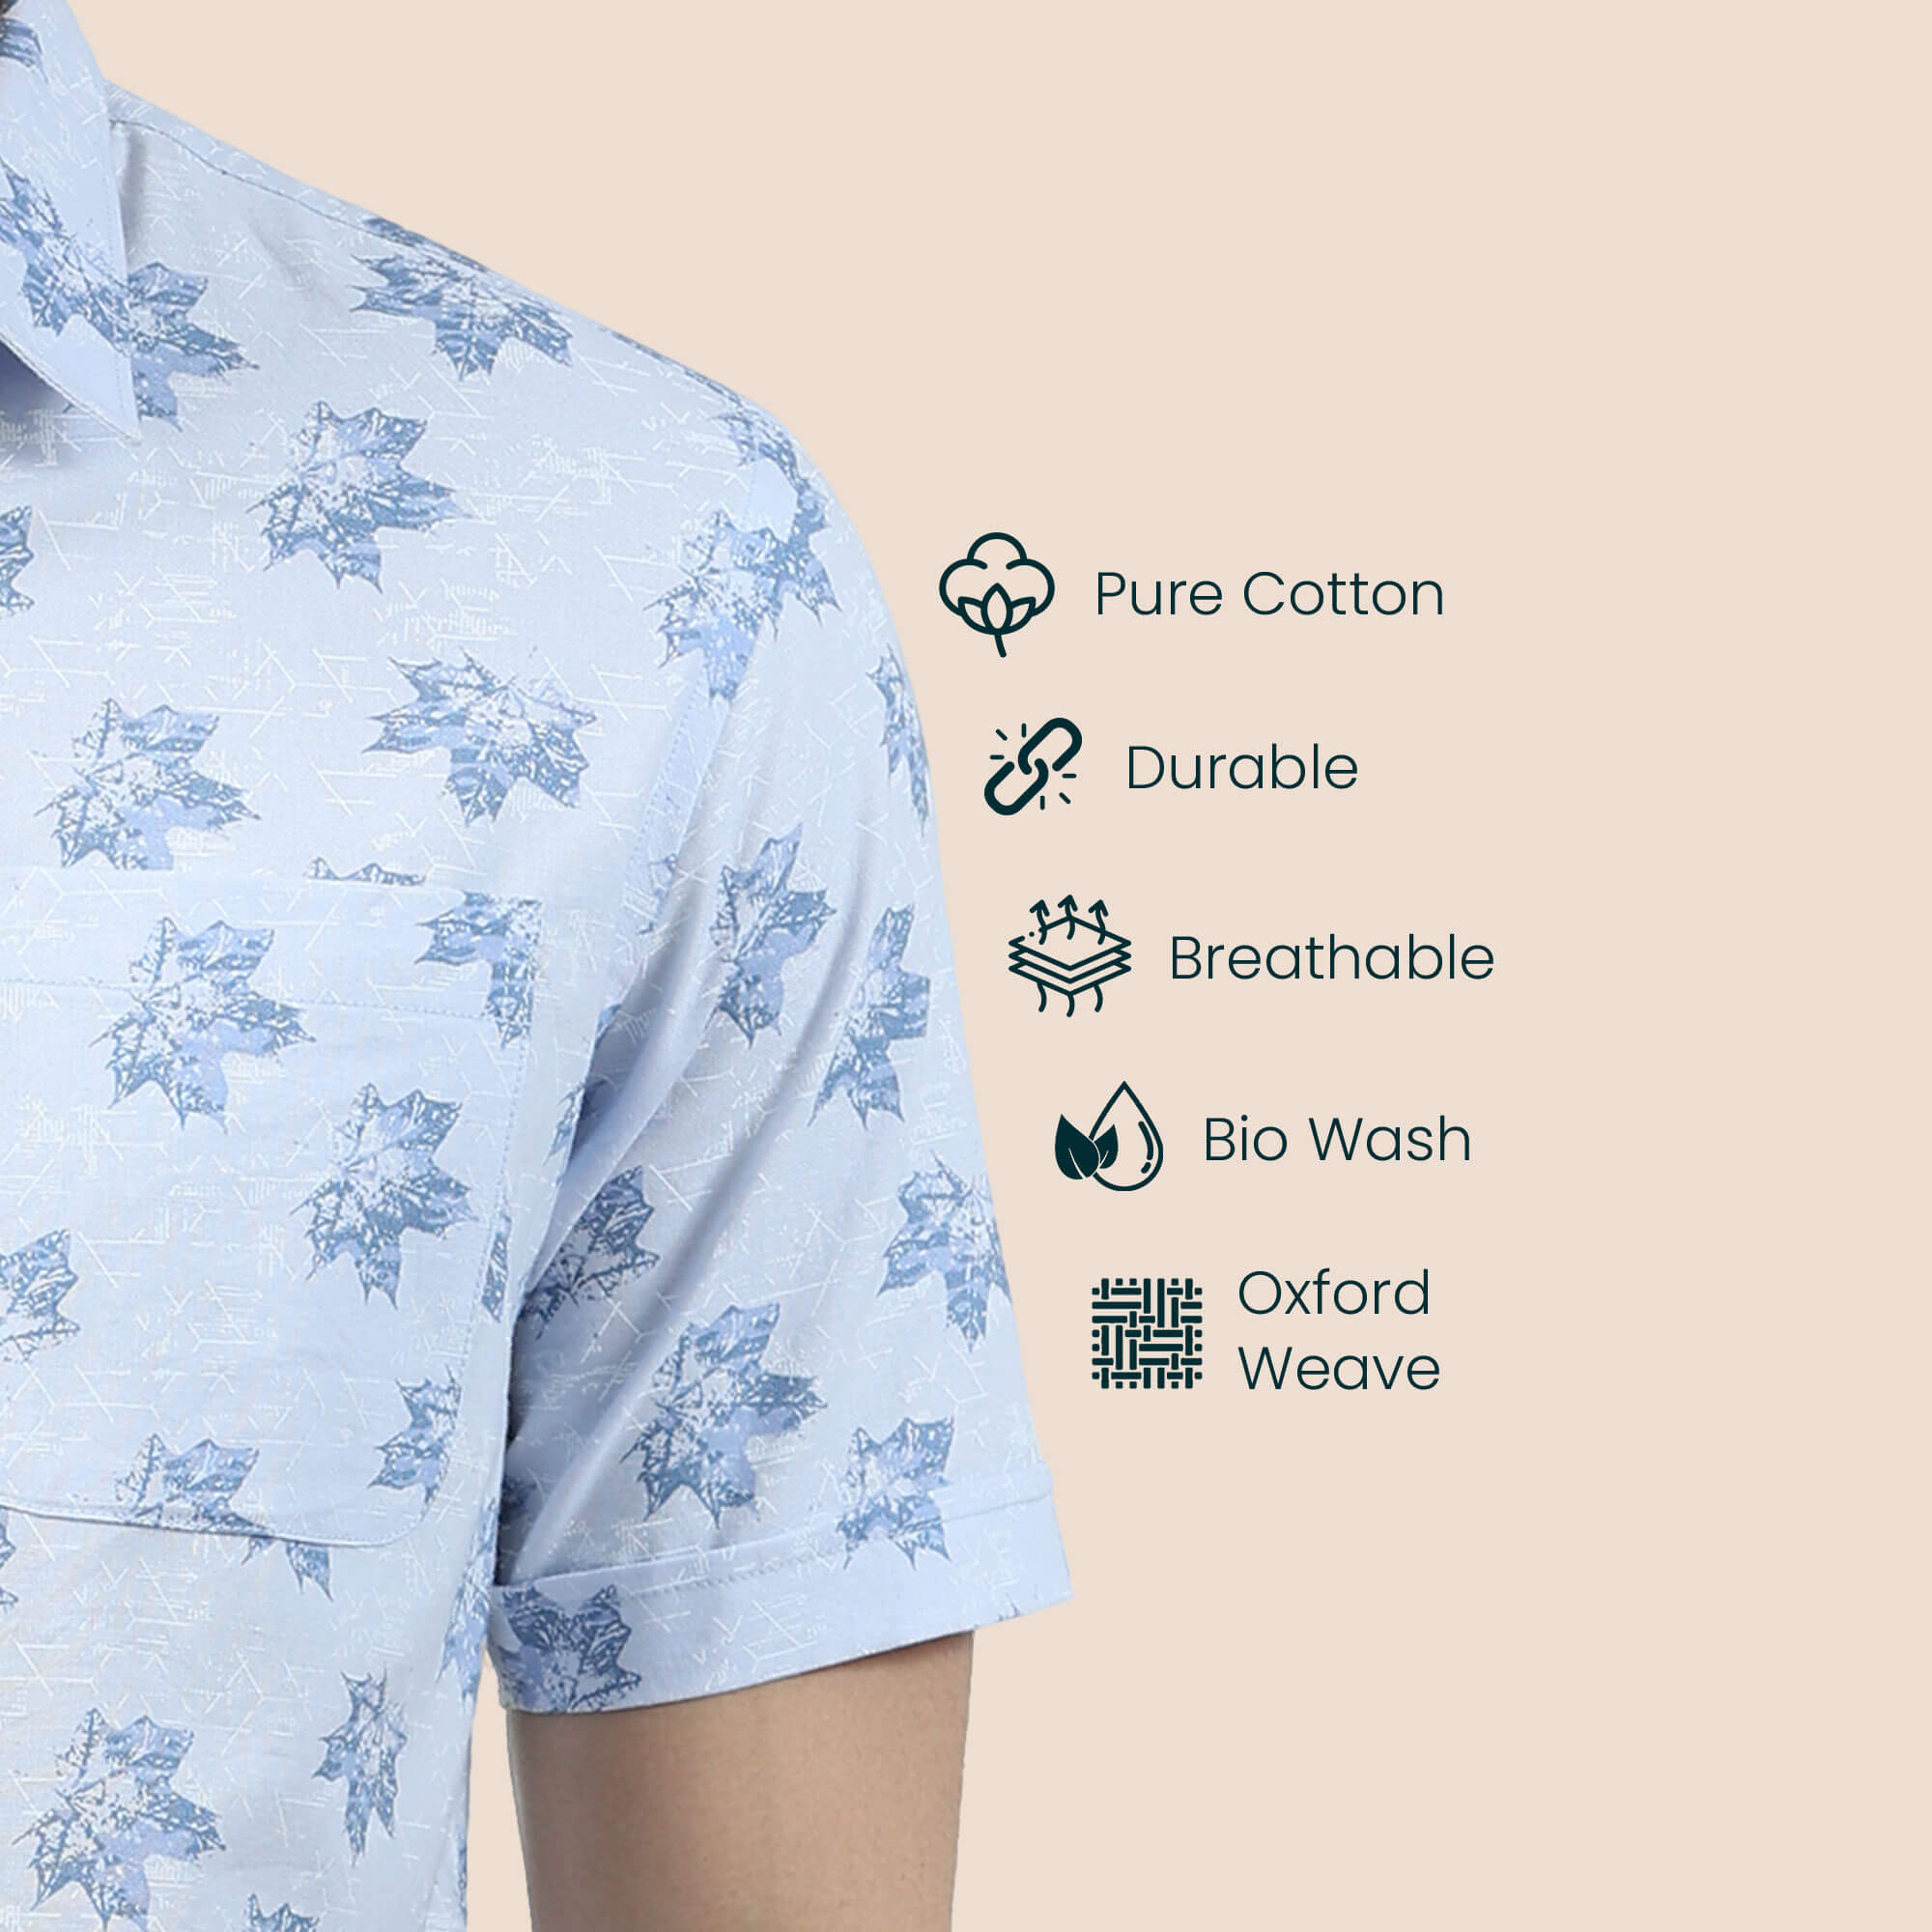 Breeze Oxford Shirt In Blue Maple Print